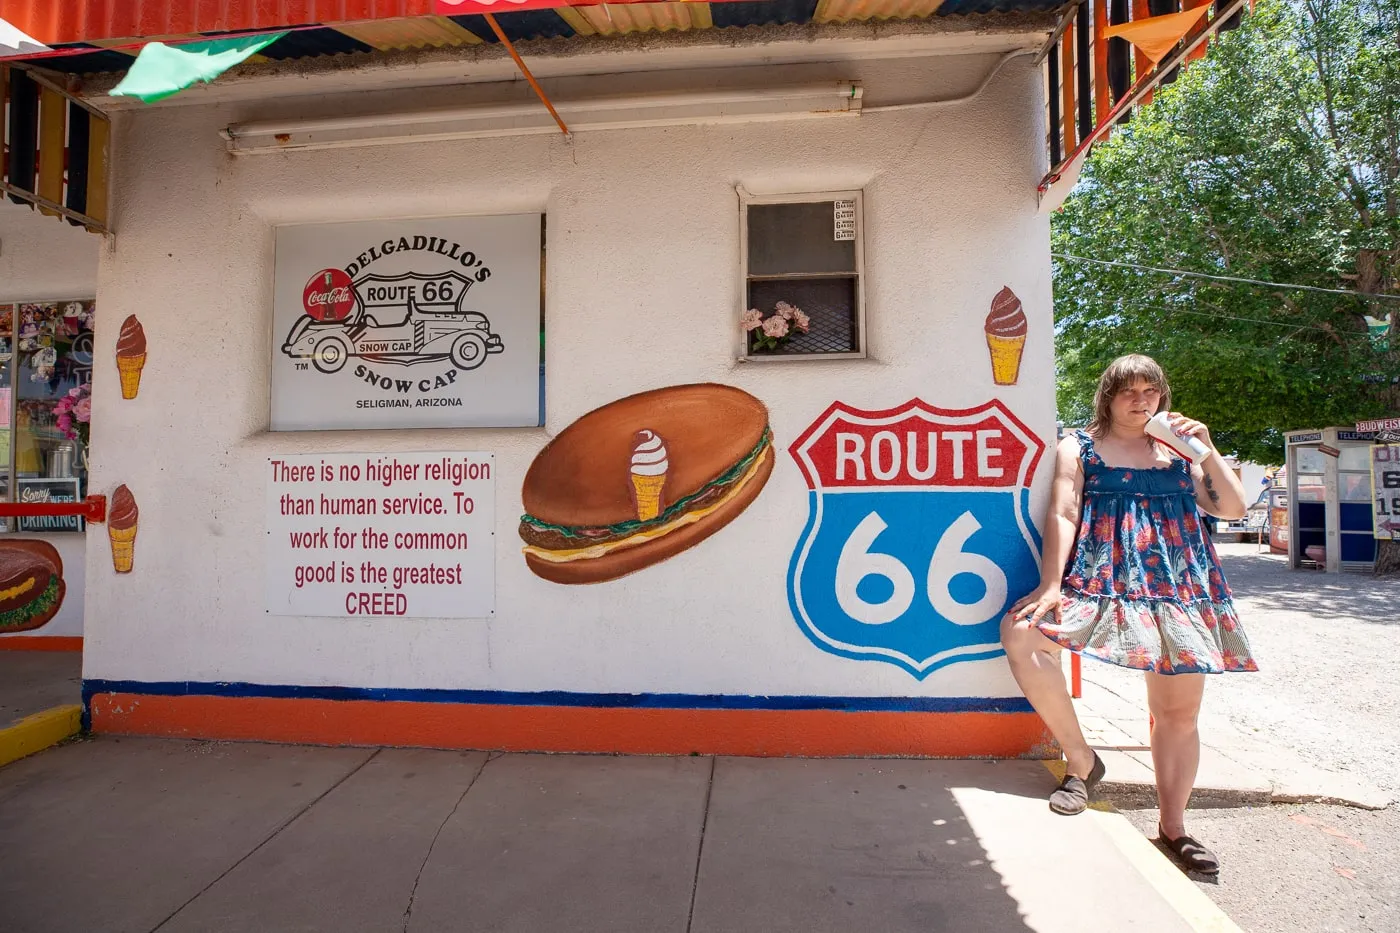 Hamburger and Route 66 mural at Delgadillo’s Snow Cap in Seligman, Arizona - Route 66 restaurant and Drive-In Diner